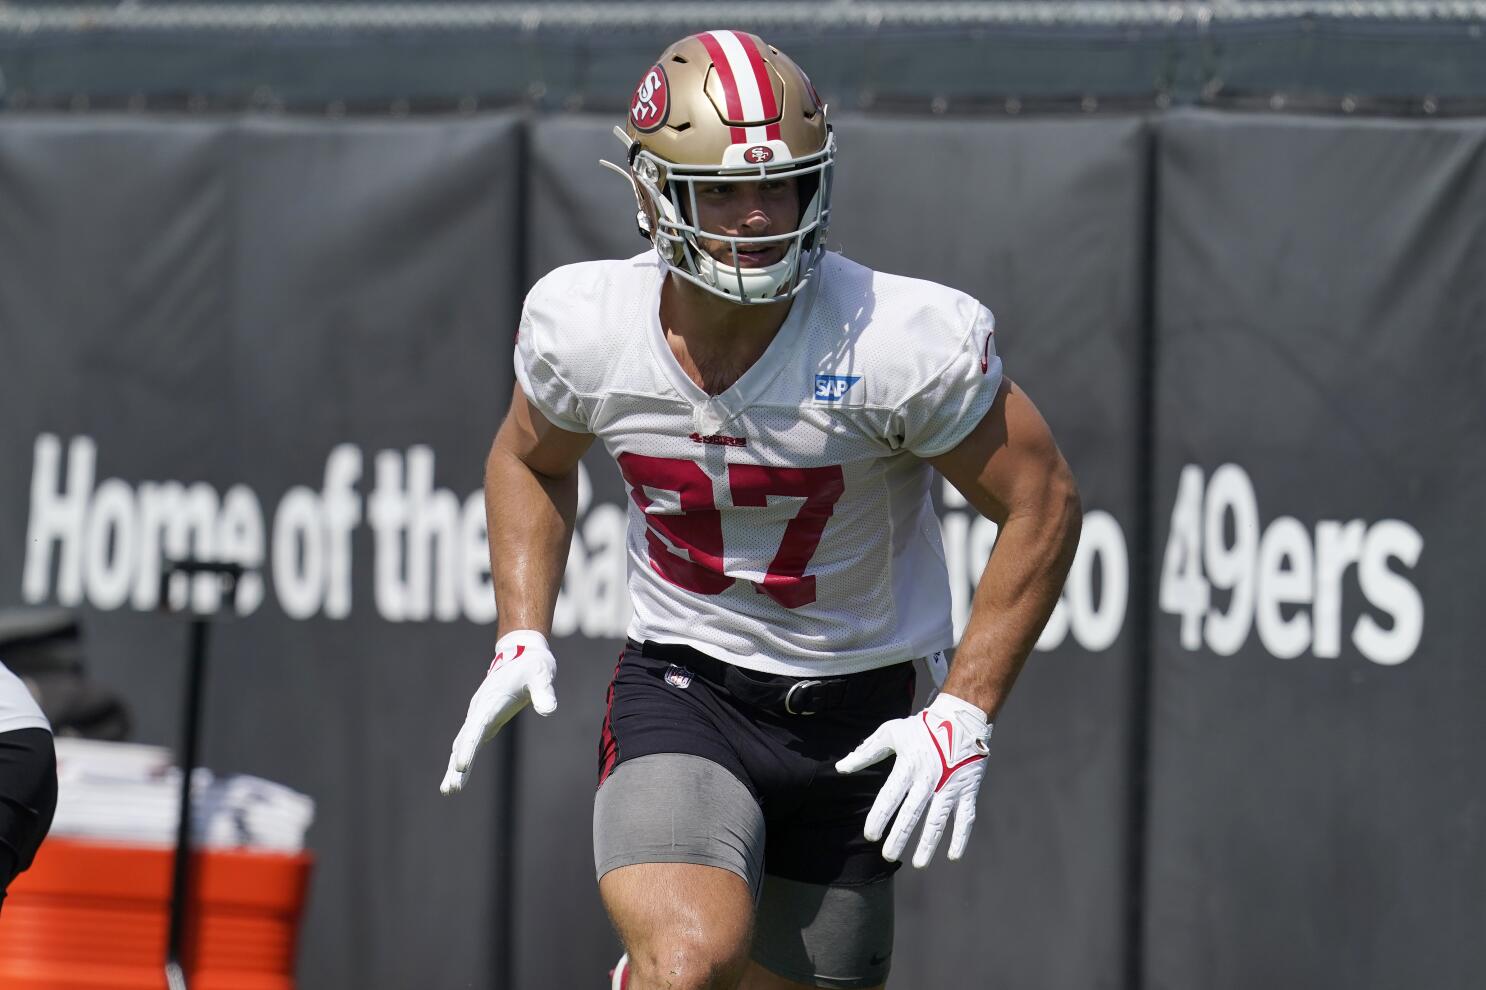 The good and not so good from 49ers training camp: Day 4